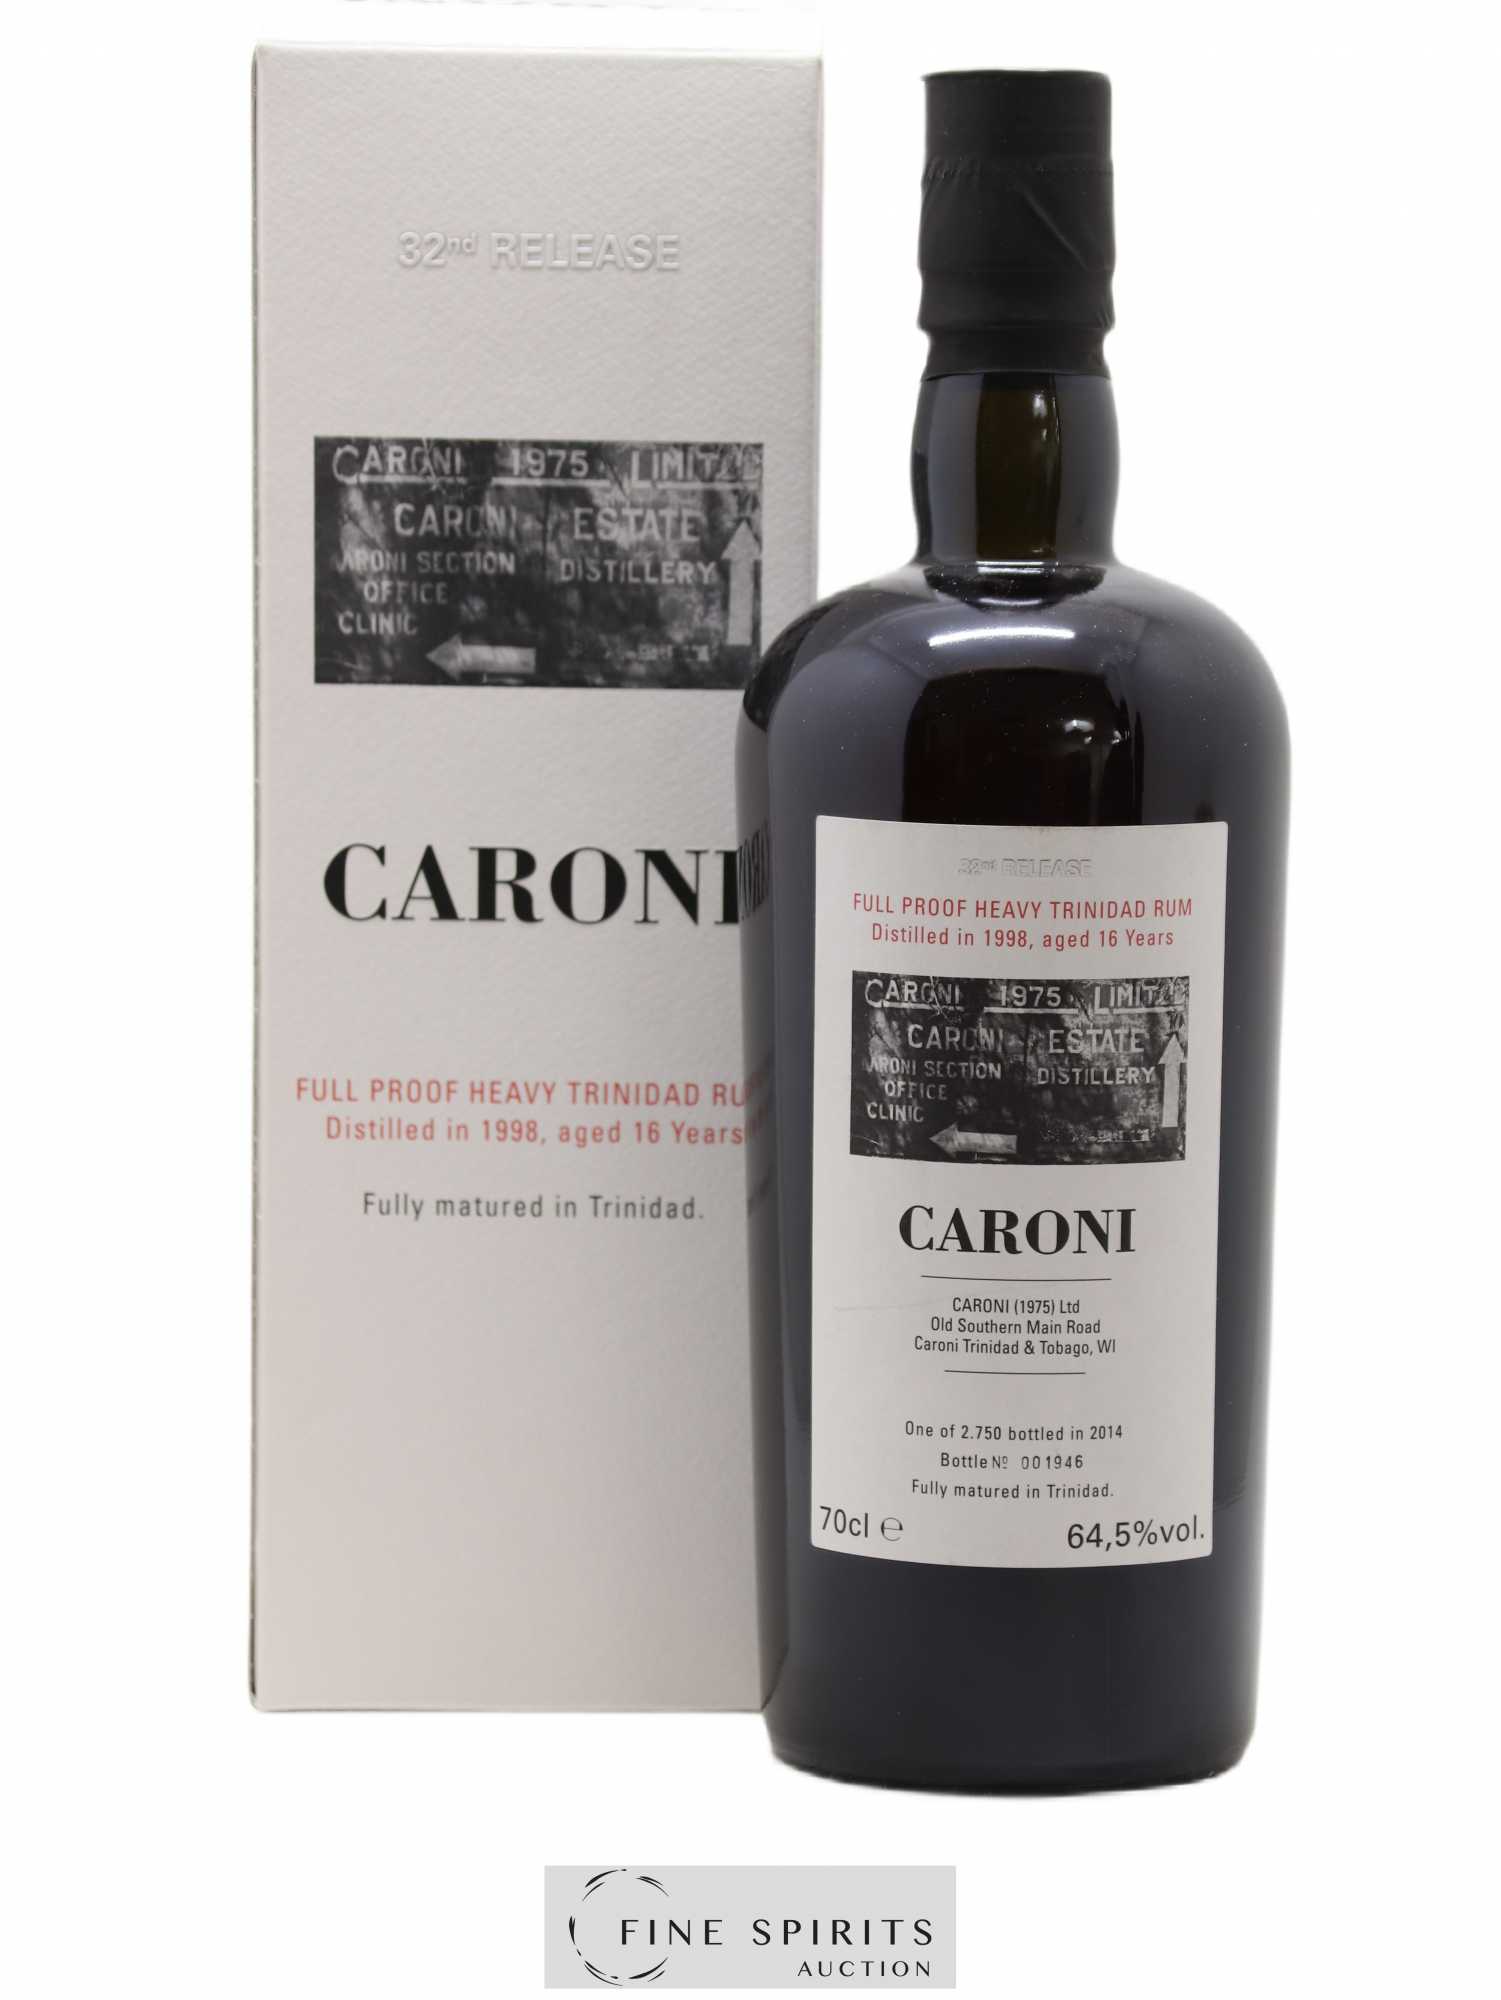 Caroni 16 years 1998 Velier Full Proof 32nd Release - One of 2750 - bottled 2014 